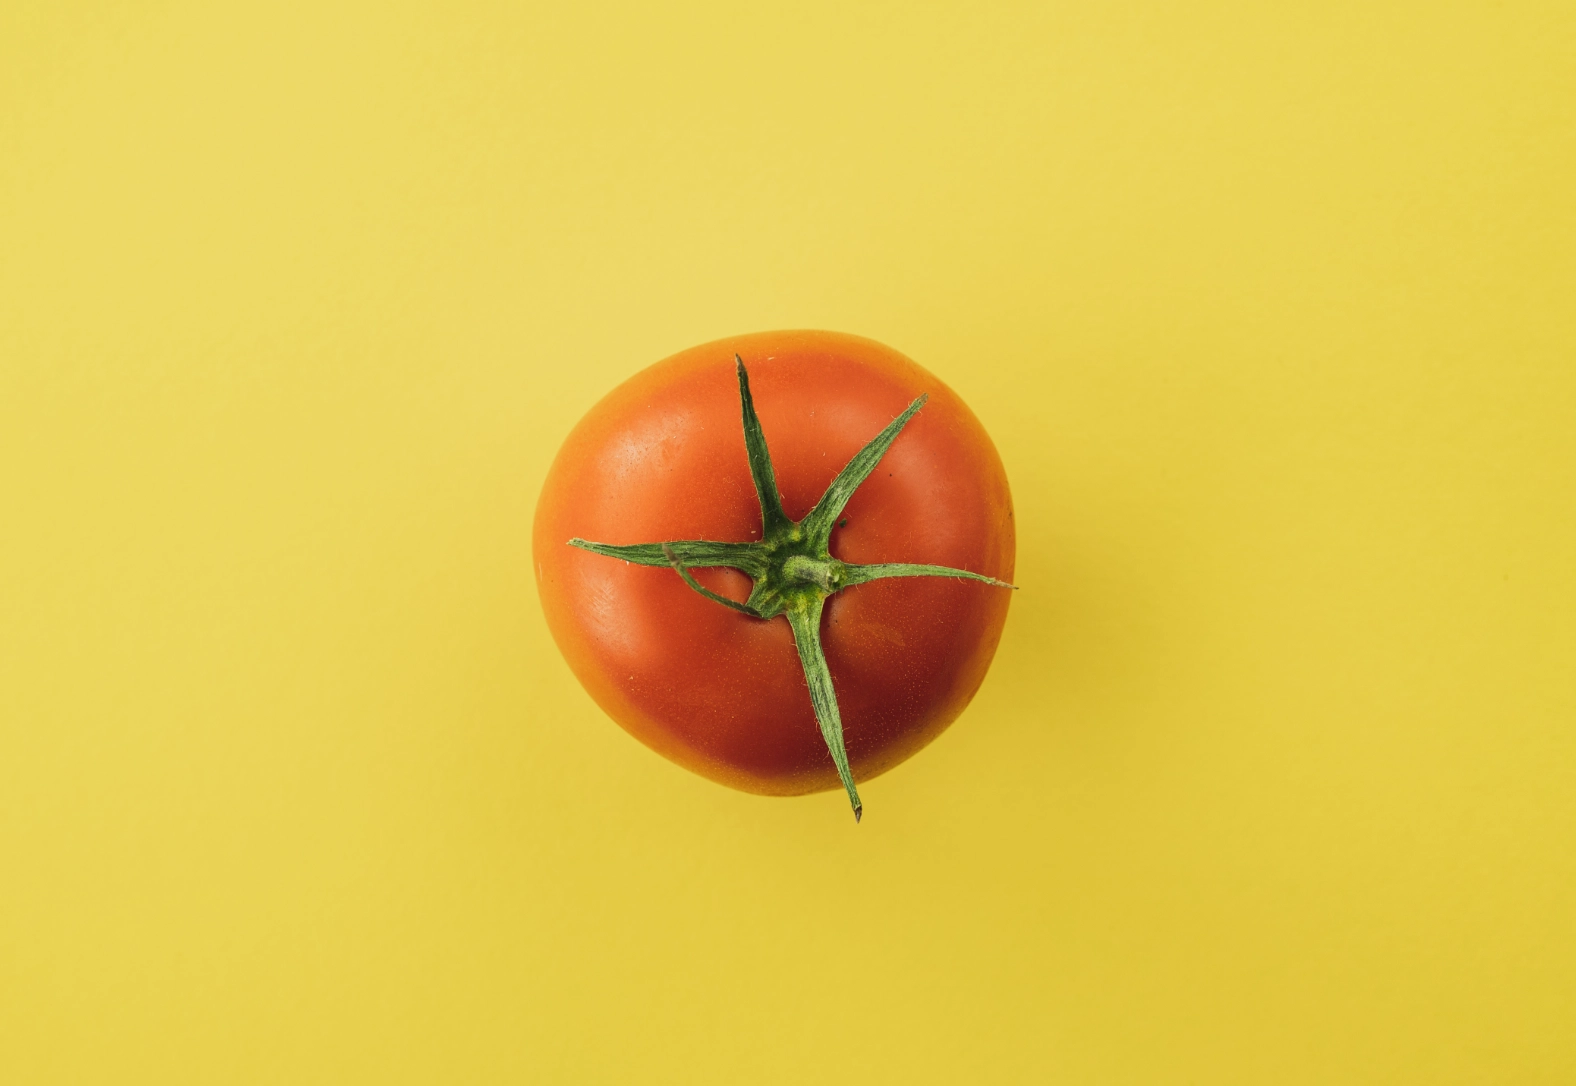 a tomato with a green stem